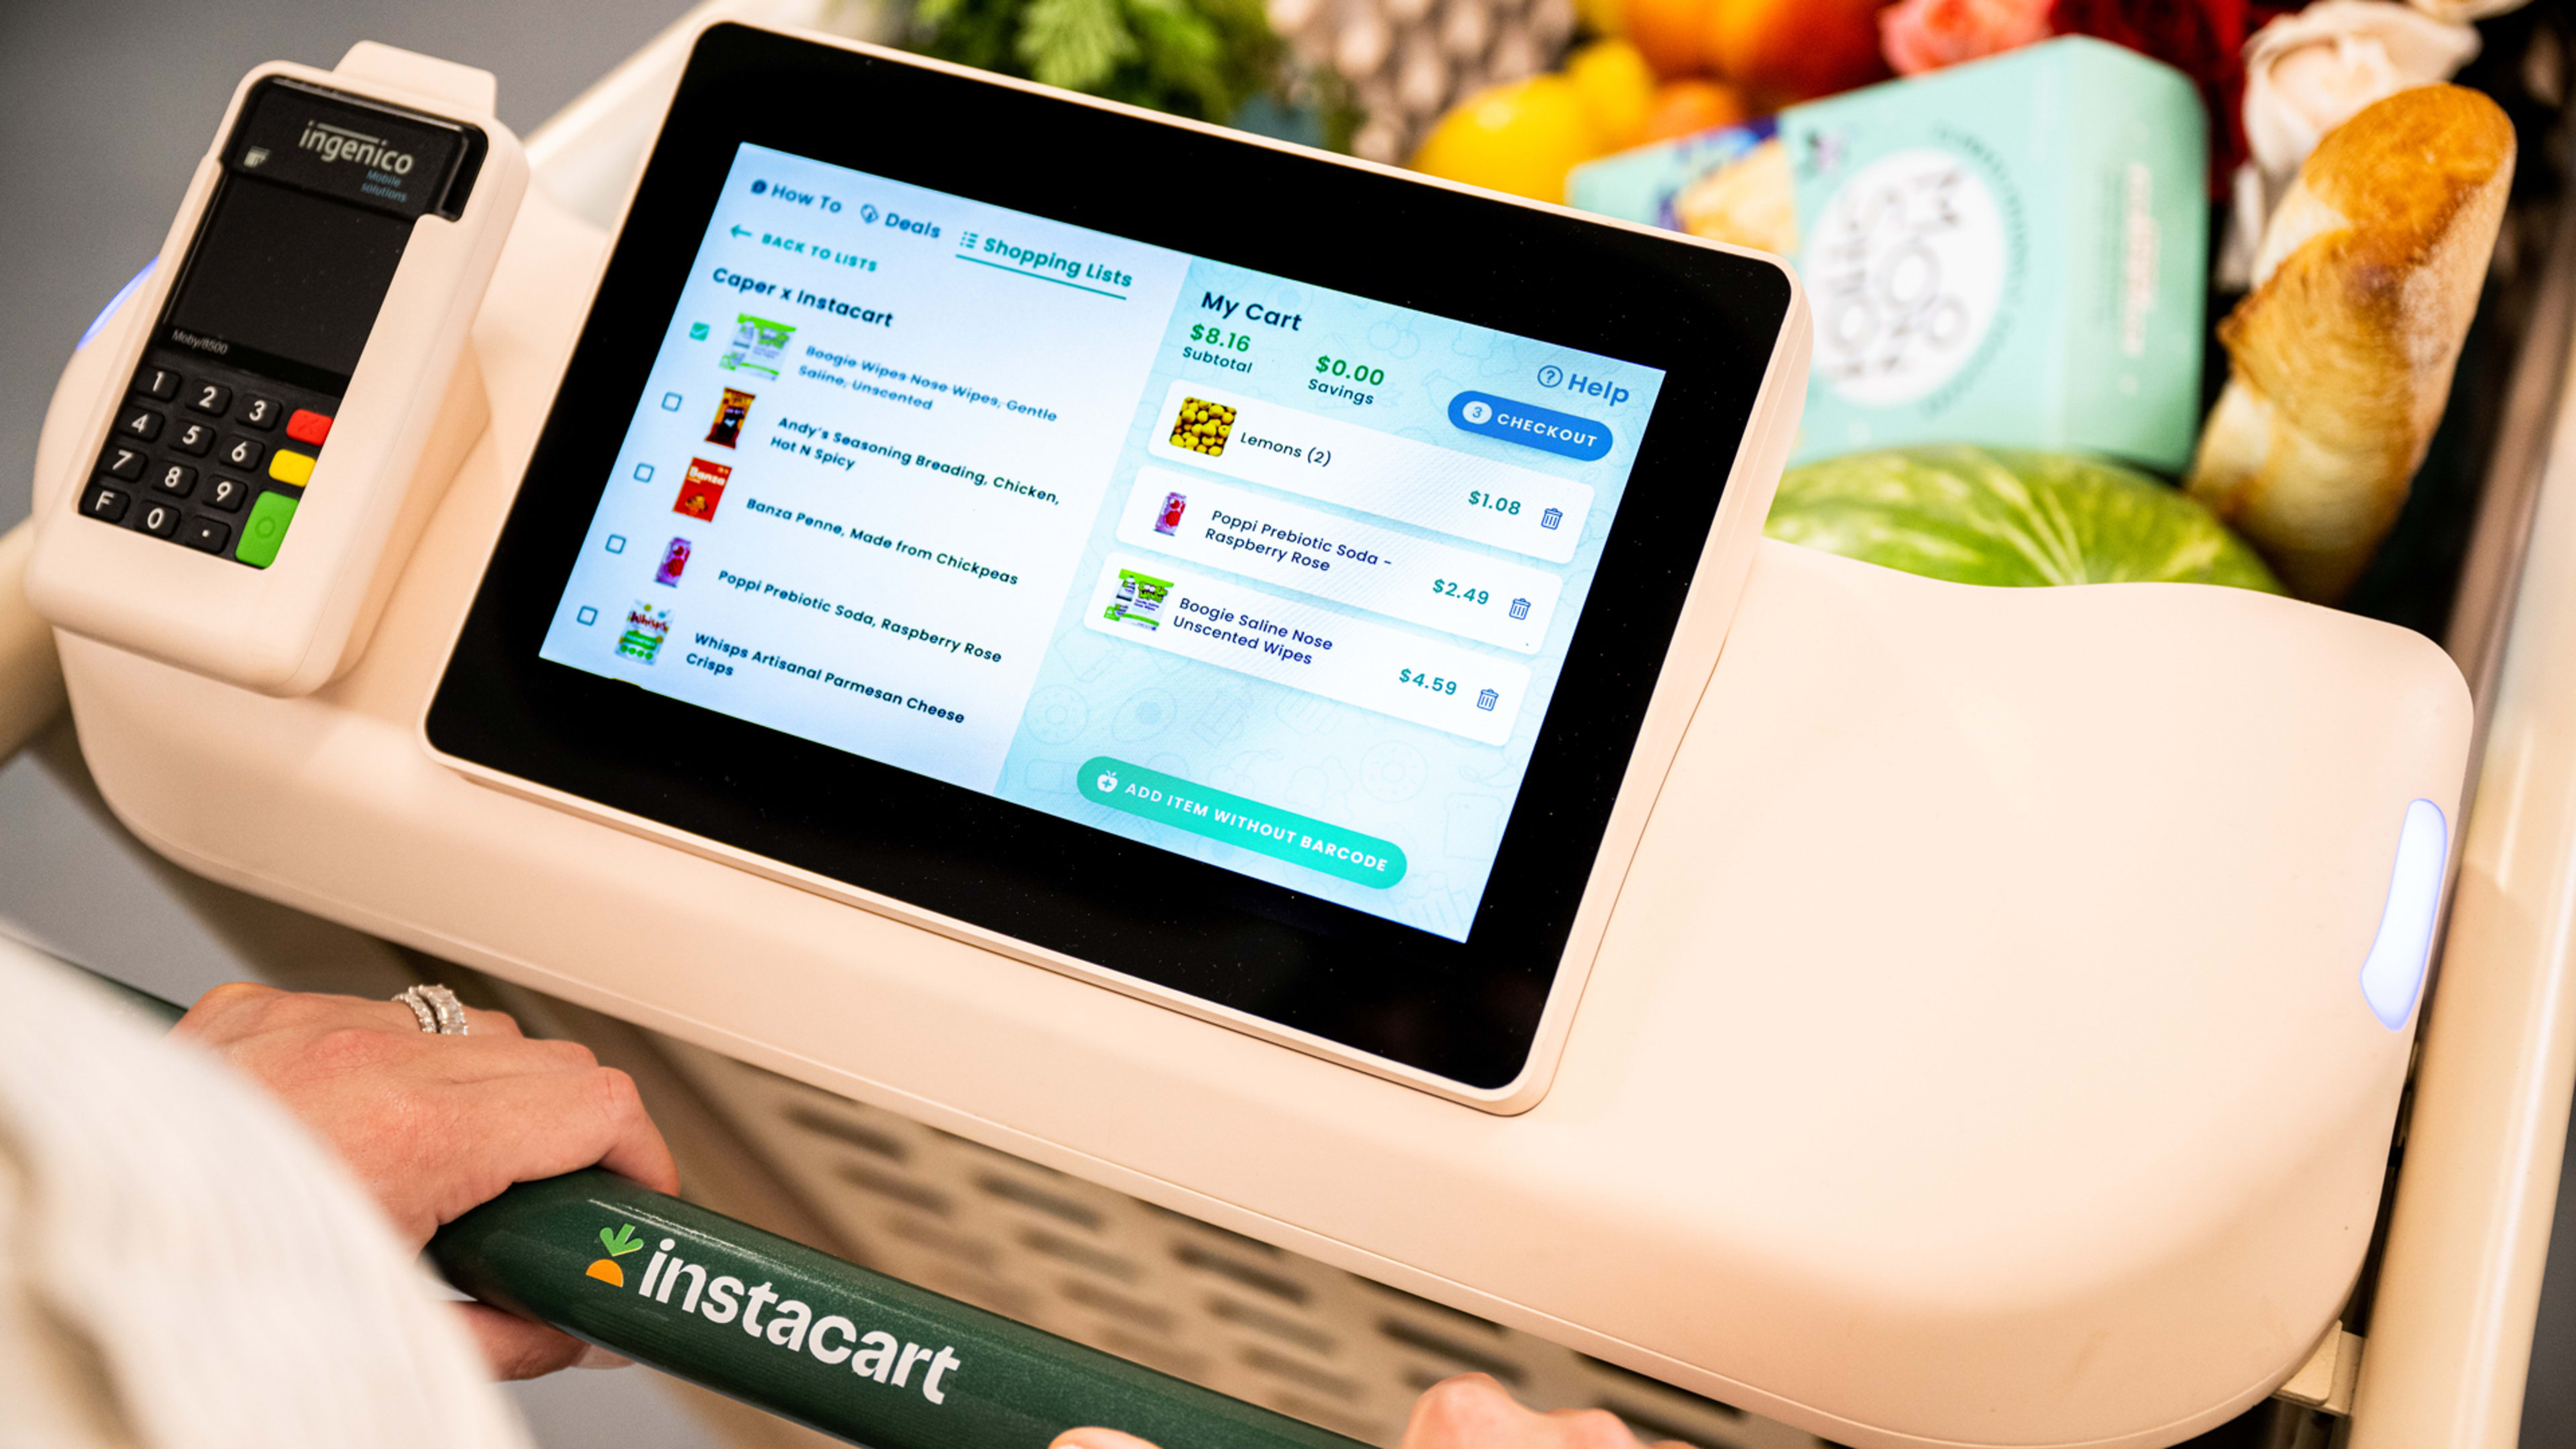 Instacart launches suite of new features to make grocery stores smarter